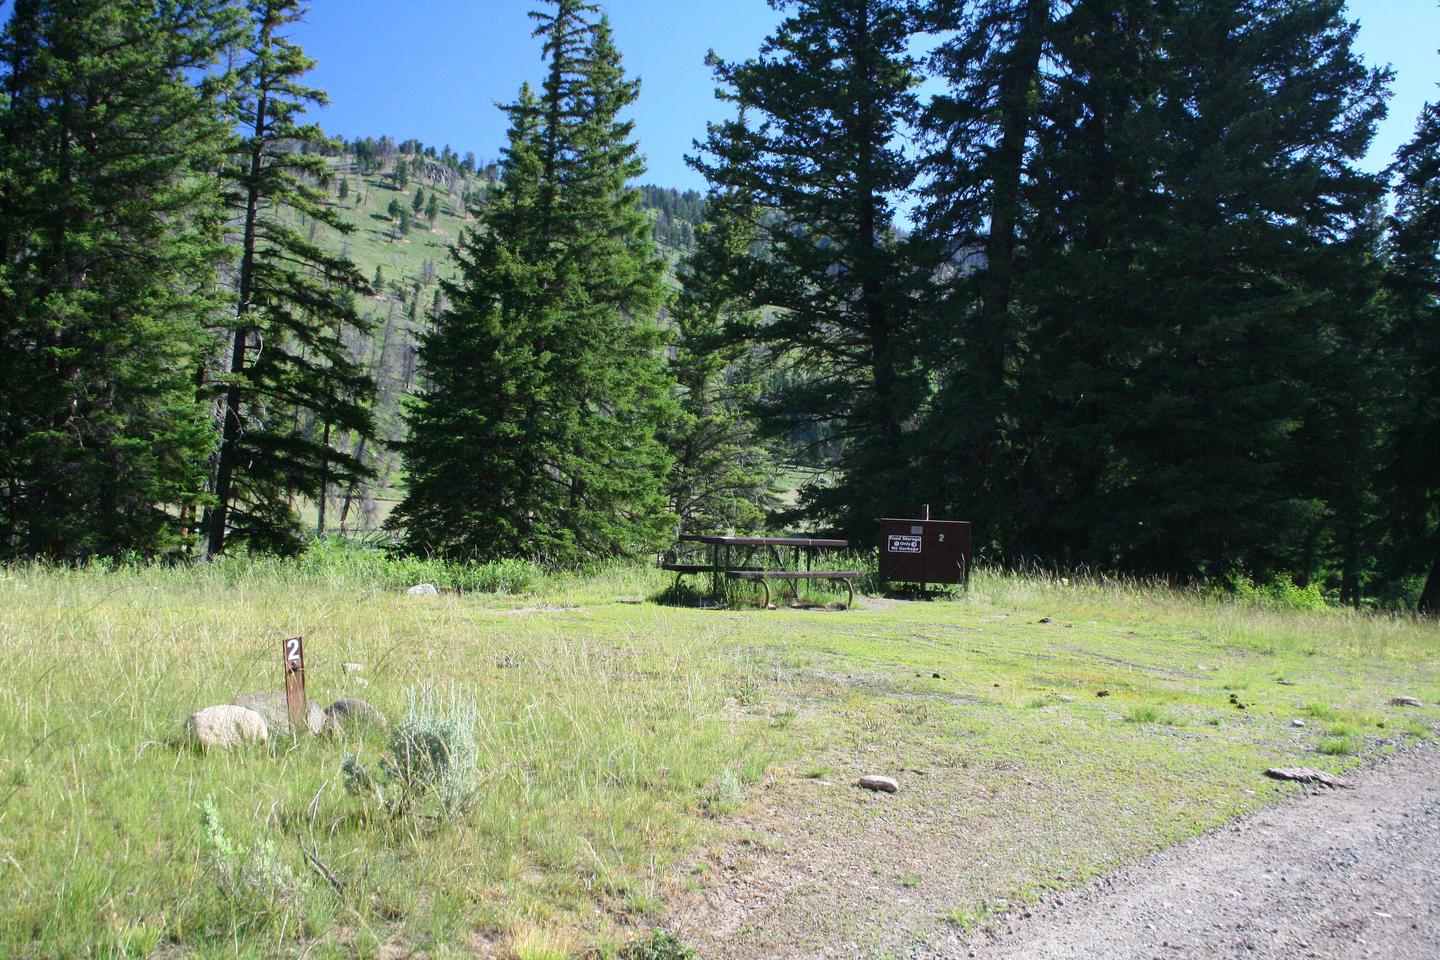 Slough Creek Campground Site #2.Slough Creek Campground Site #2